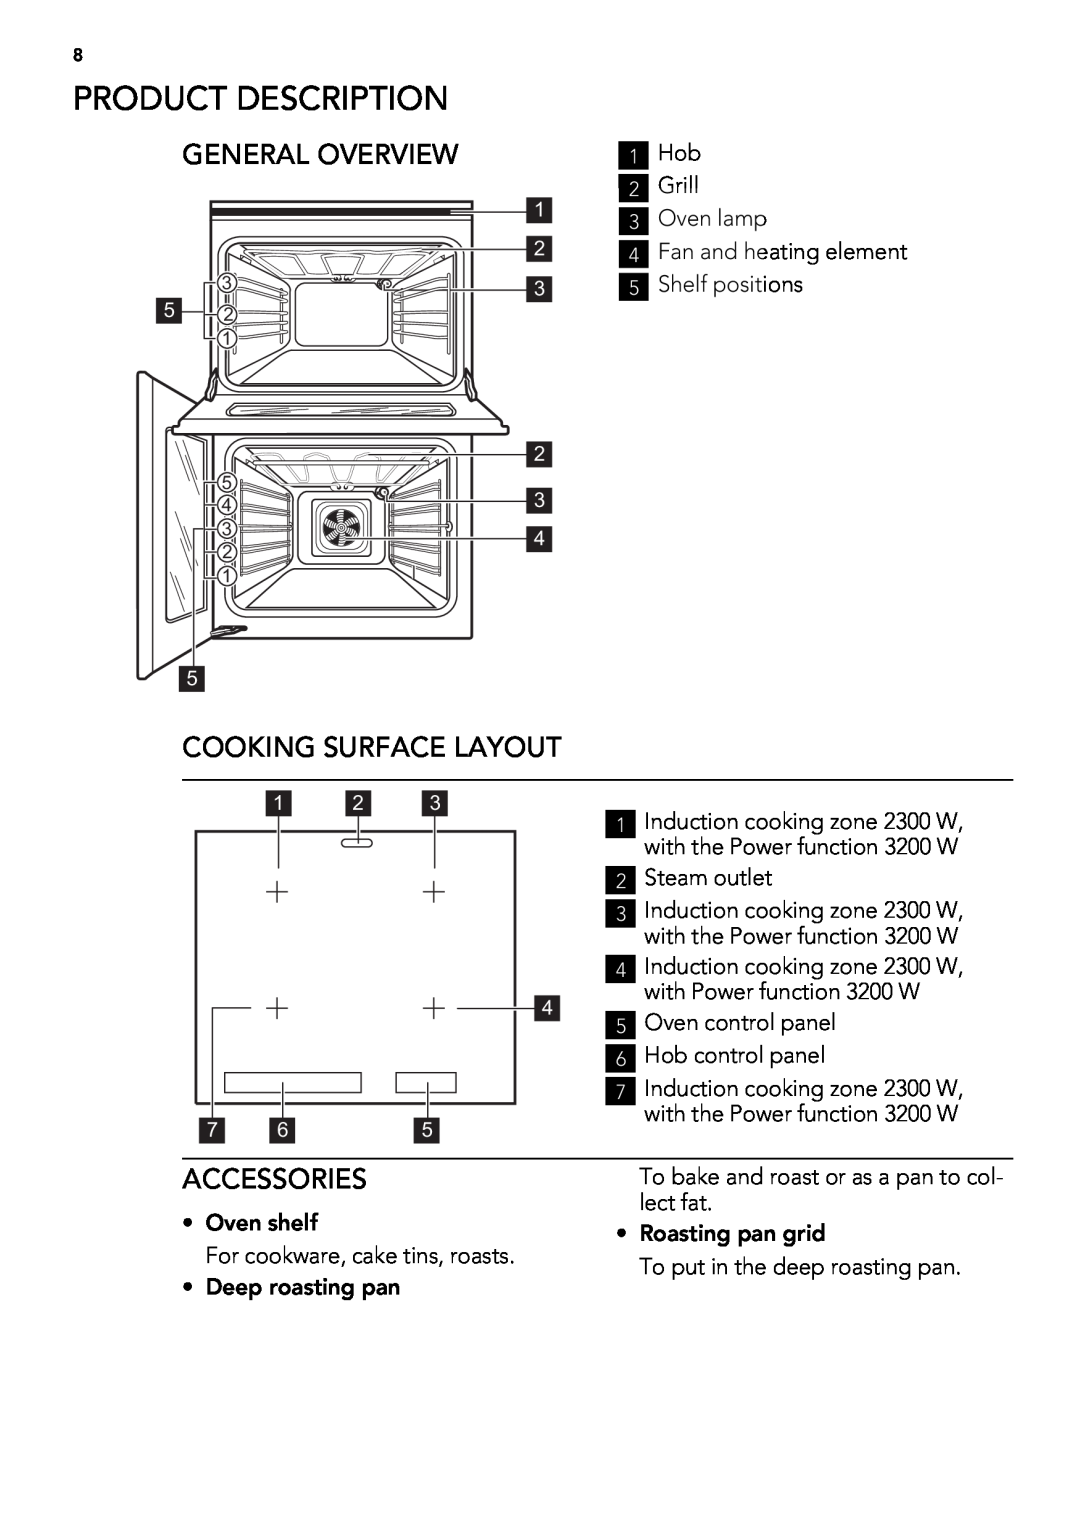 AEG 49332I-MN Product Description, General Overview, Cooking Surface Layout, Hob control panel, lect fat, Accessories 